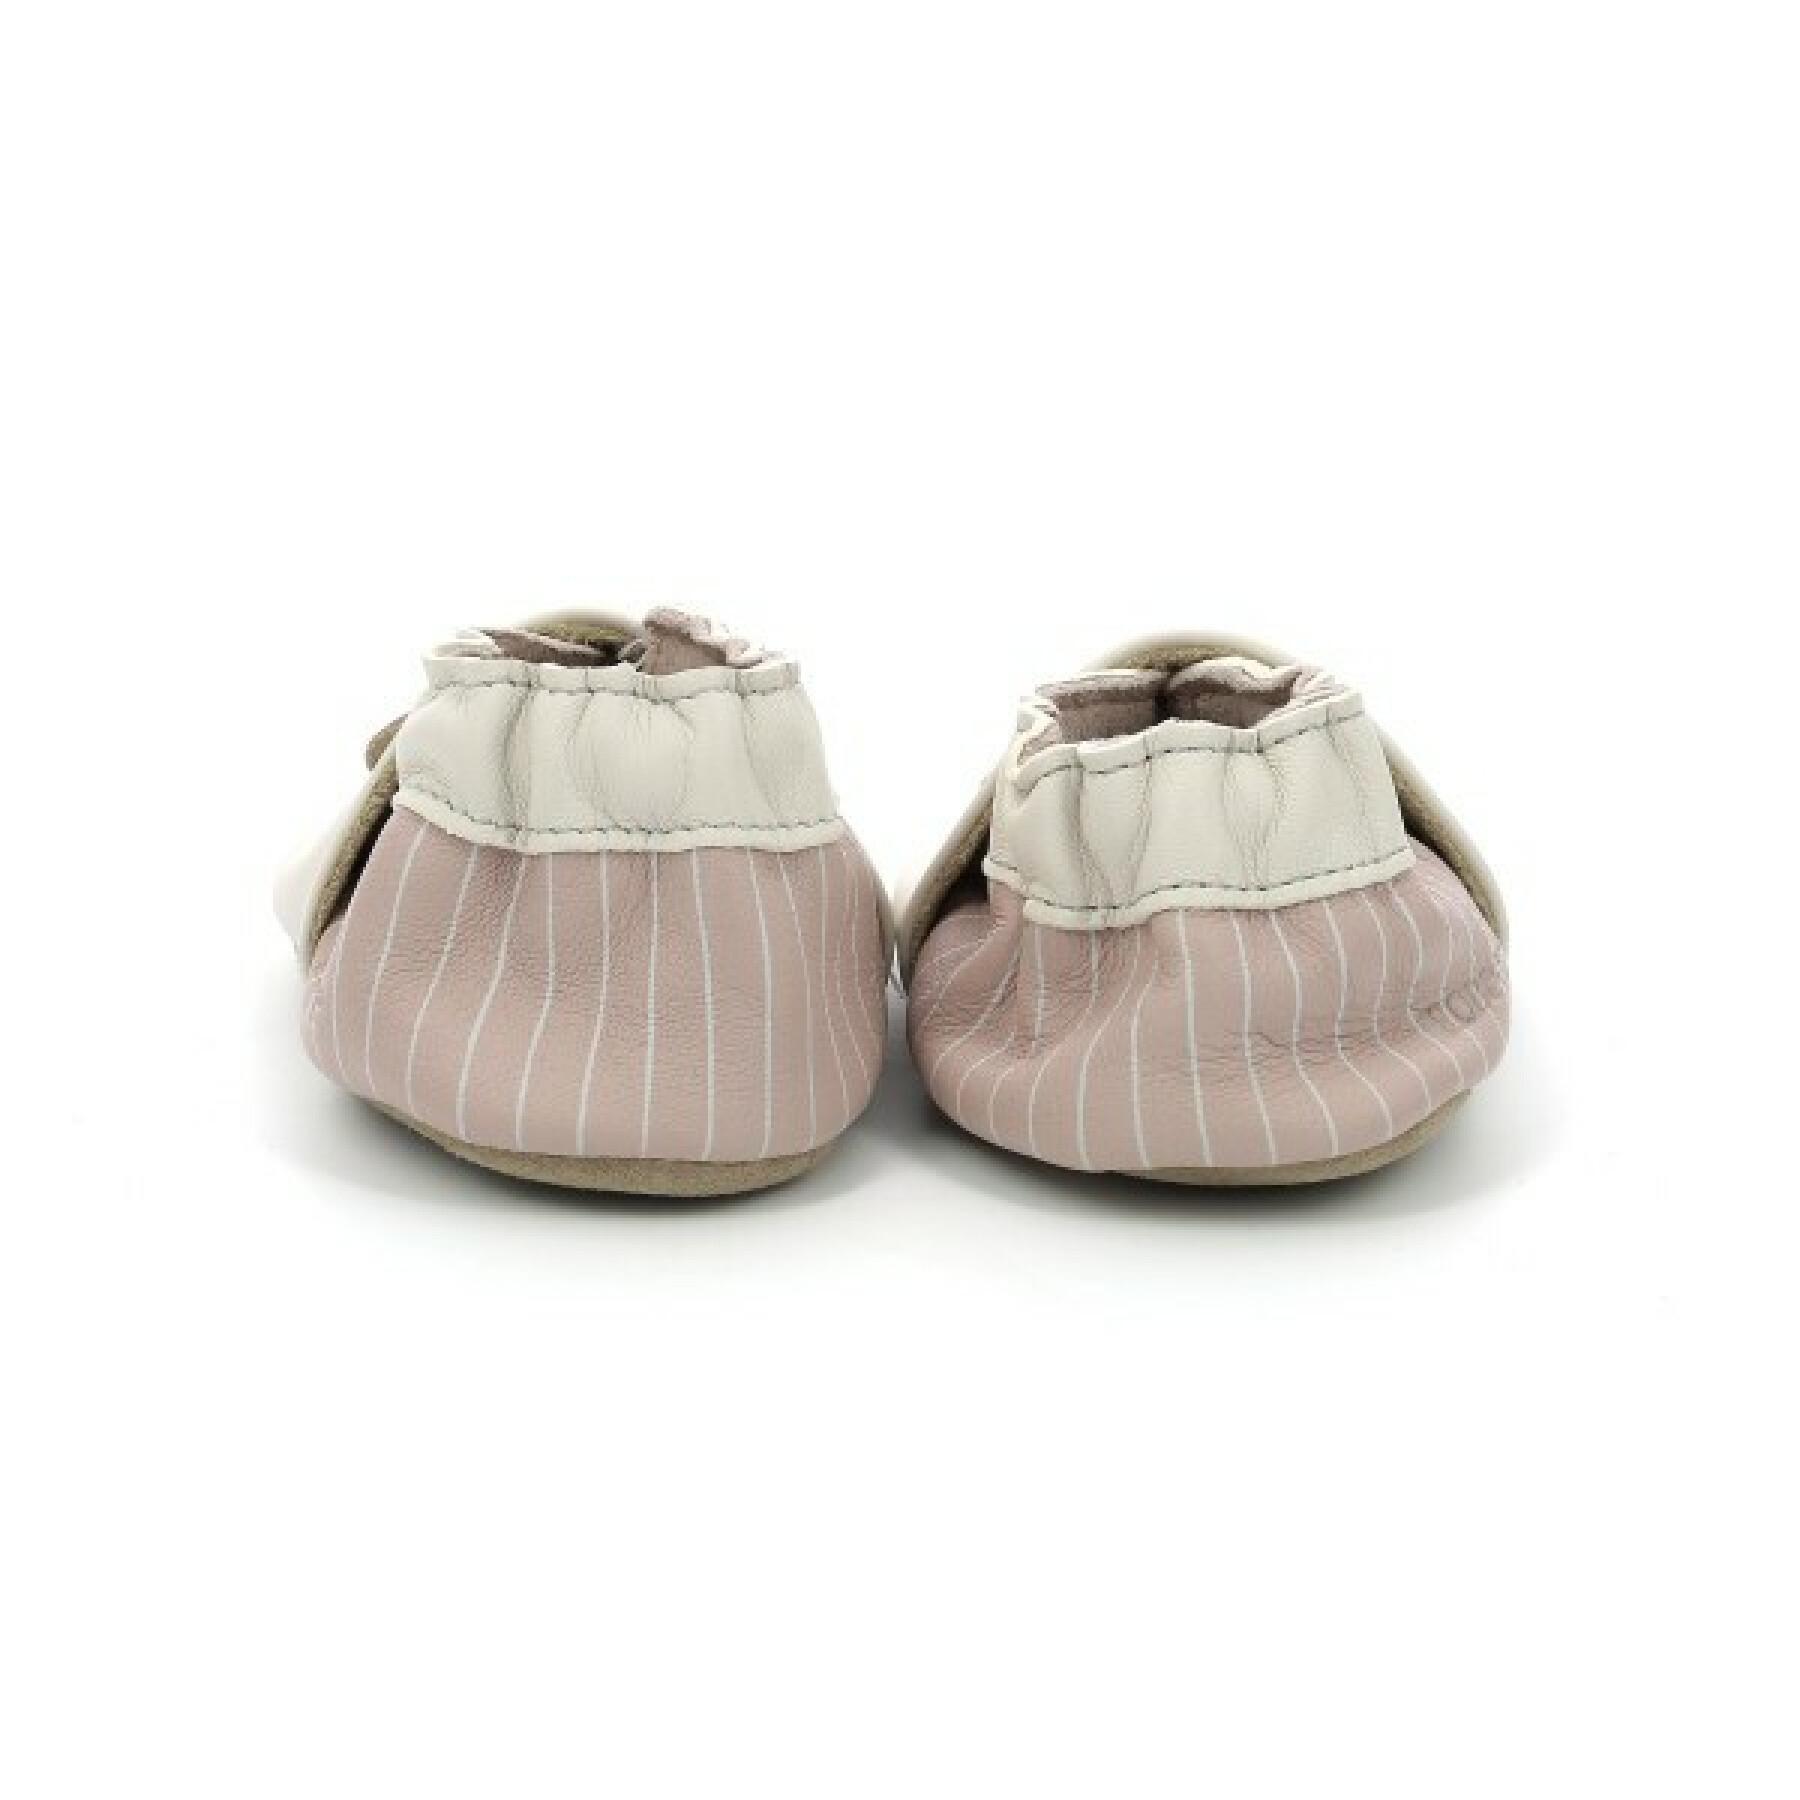 Baby slippers Robeez charming cats